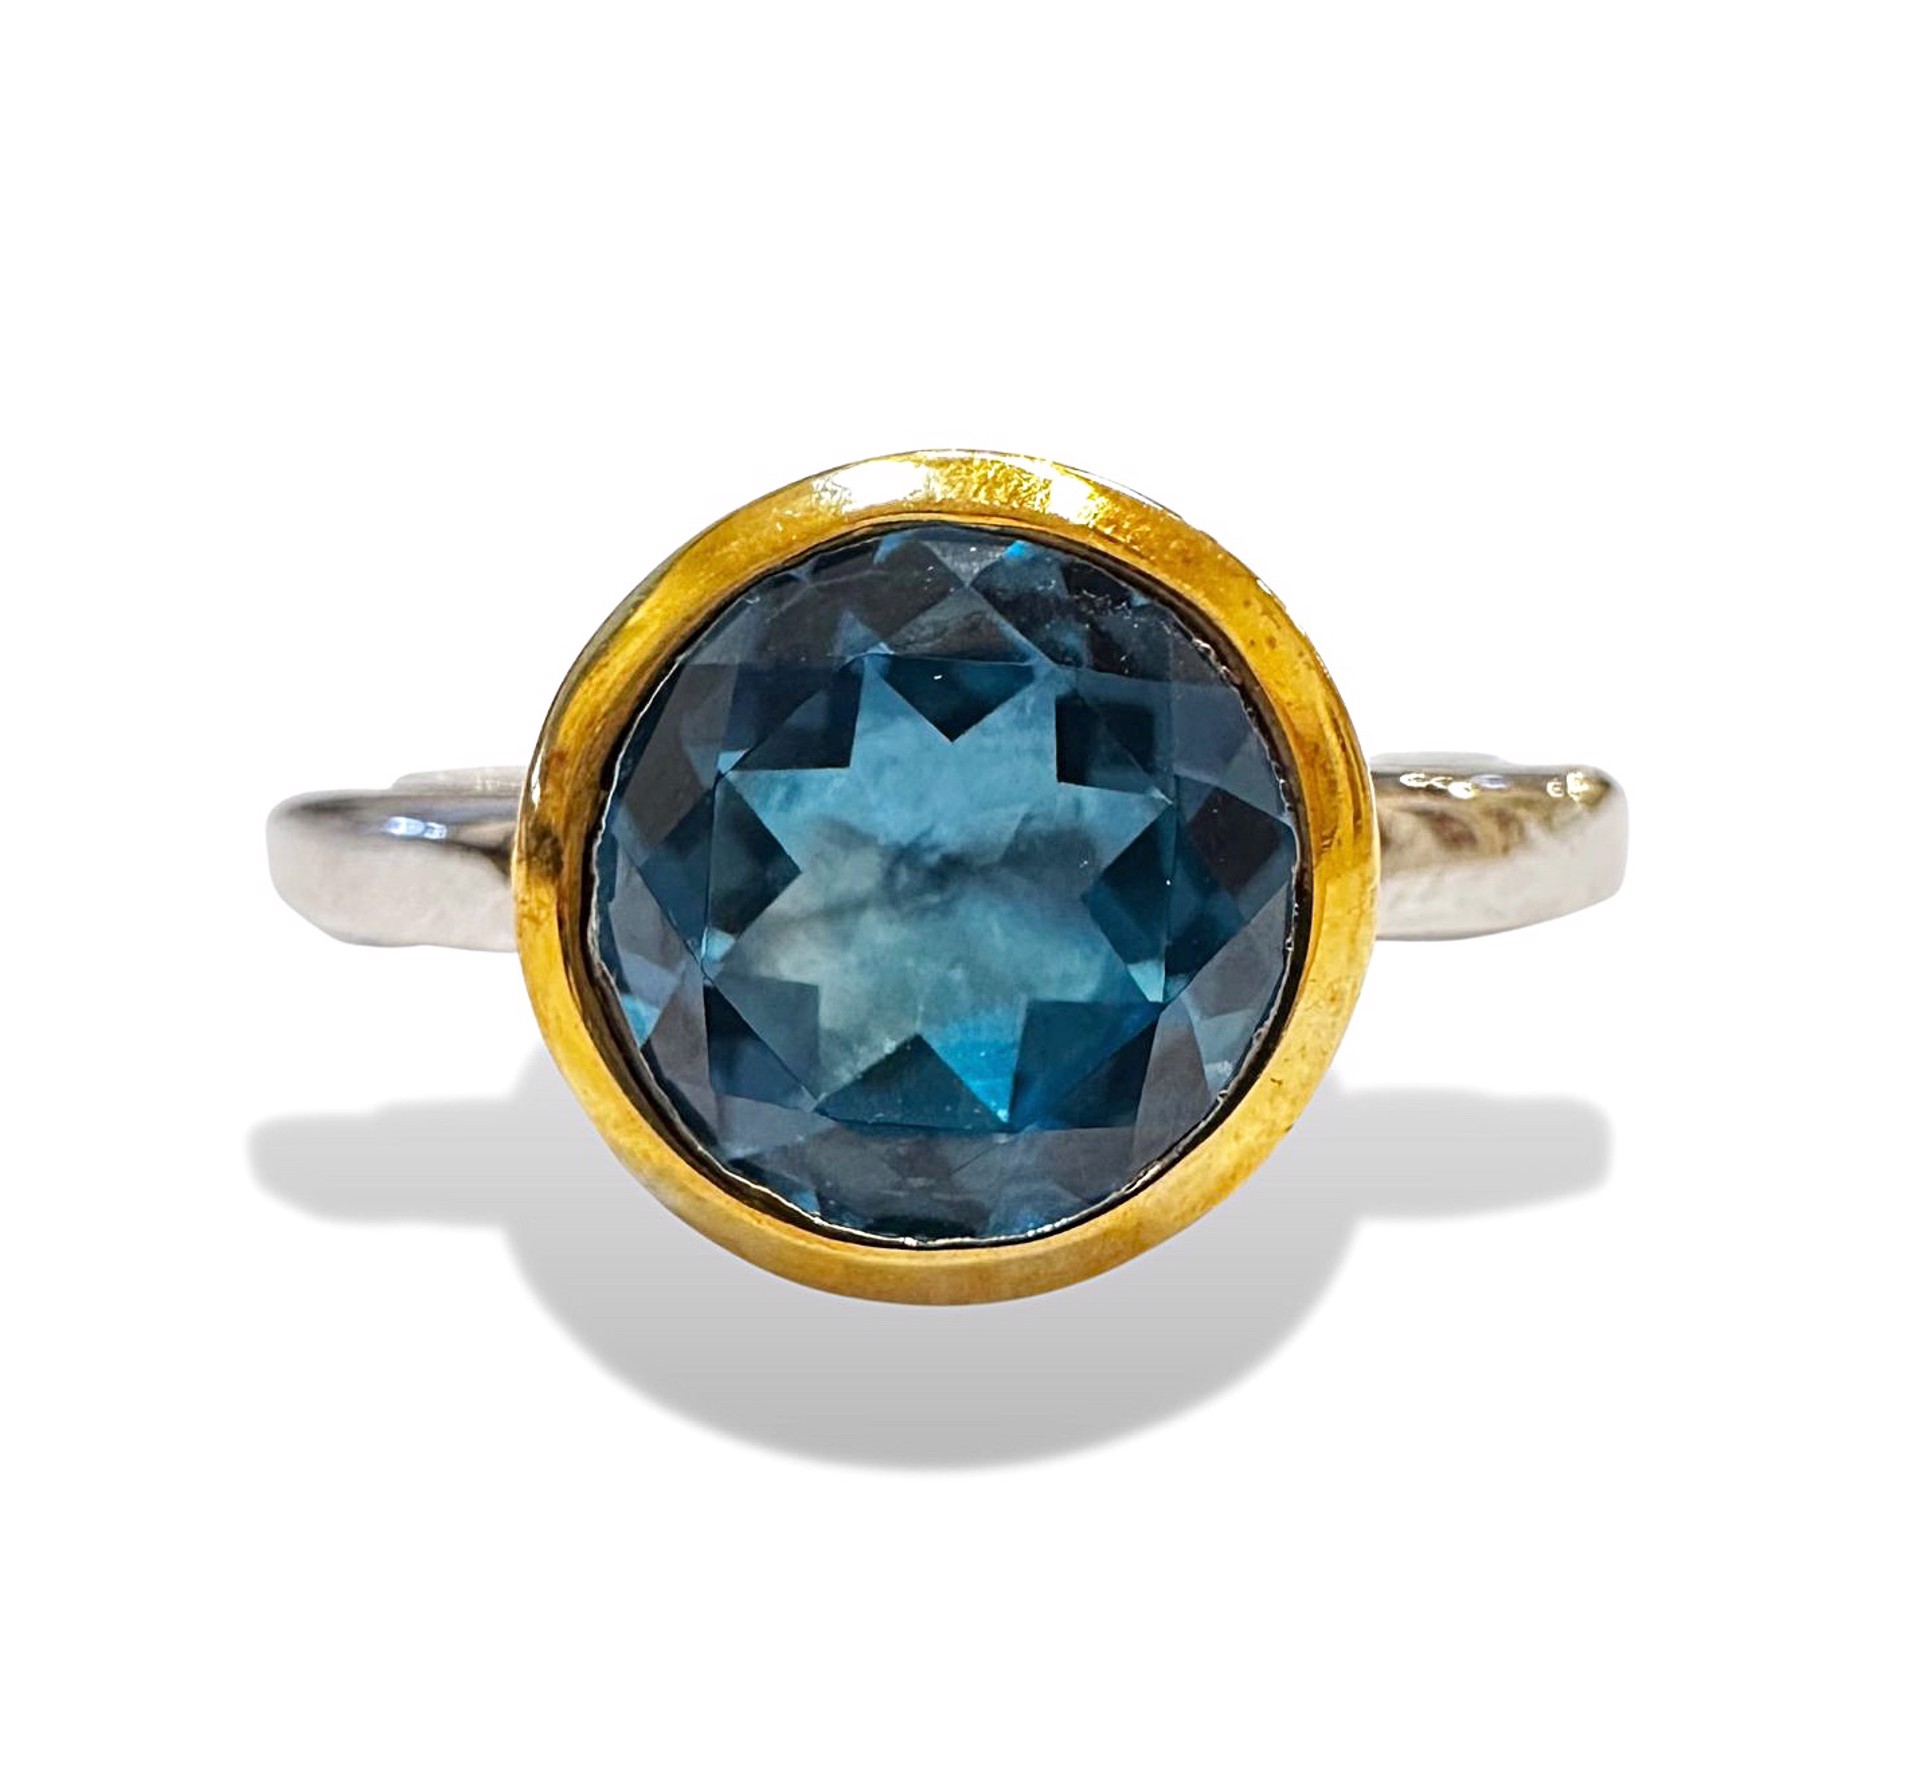 Ring - Sterling Silver & Blue Topaz with 14kt Gold Surround Size 7.5 R3328 BT by Joryel Vera